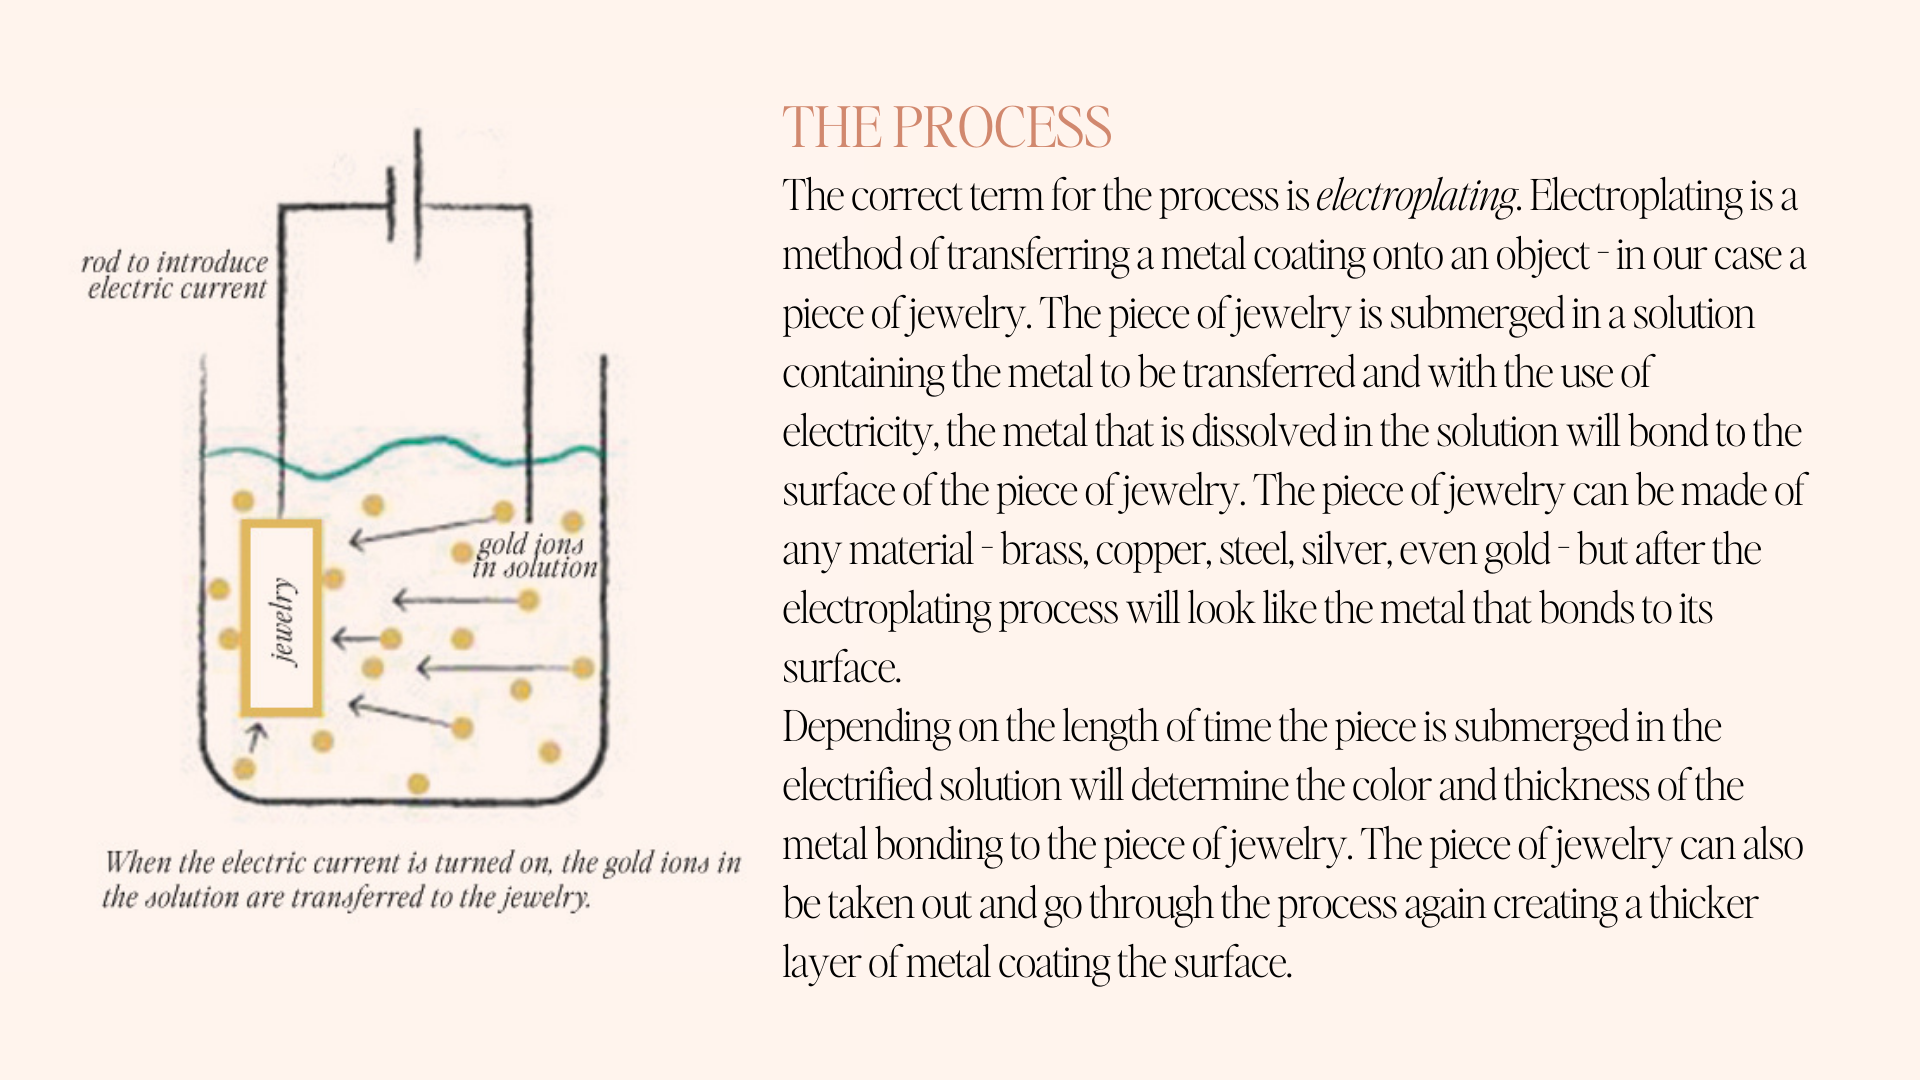 the process The correct term for the process is electroplating. Electroplating is a method of transferring a metal coating onto an object - in our case a piece of jewelry. The piece of jewelry is submerged in a solution containing the metal to be transferred and with the use of electricity, the metal that is dissolved in the solution will bond to the surface of the piece of jewelry. The piece of jewelry can be made of any material - brass, copper, steel, silver, even gold - but after the electroplating process will look like the metal that bonds to its surface. Depending on the length of time the piece is submerged in the electrified solution will determine the color and thickness of the metal bonding to the piece of jewelry. The piece of jewelry can also be taken out and go through the process again creating a thicker layer of metal coating the surface.